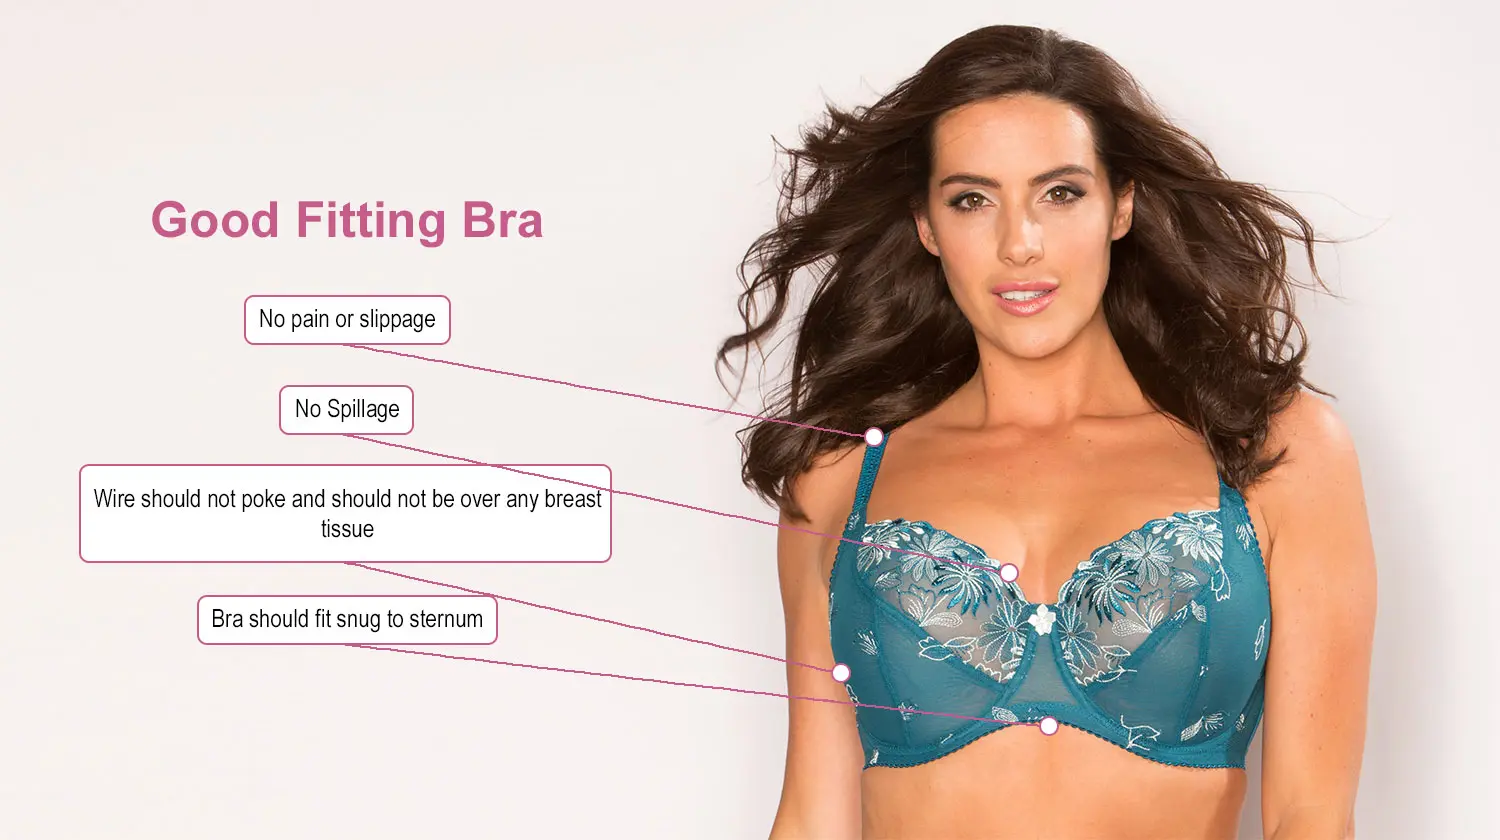 Does Your Bra Hurt You? Here's How To Fix It - ParfaitLingerie.com